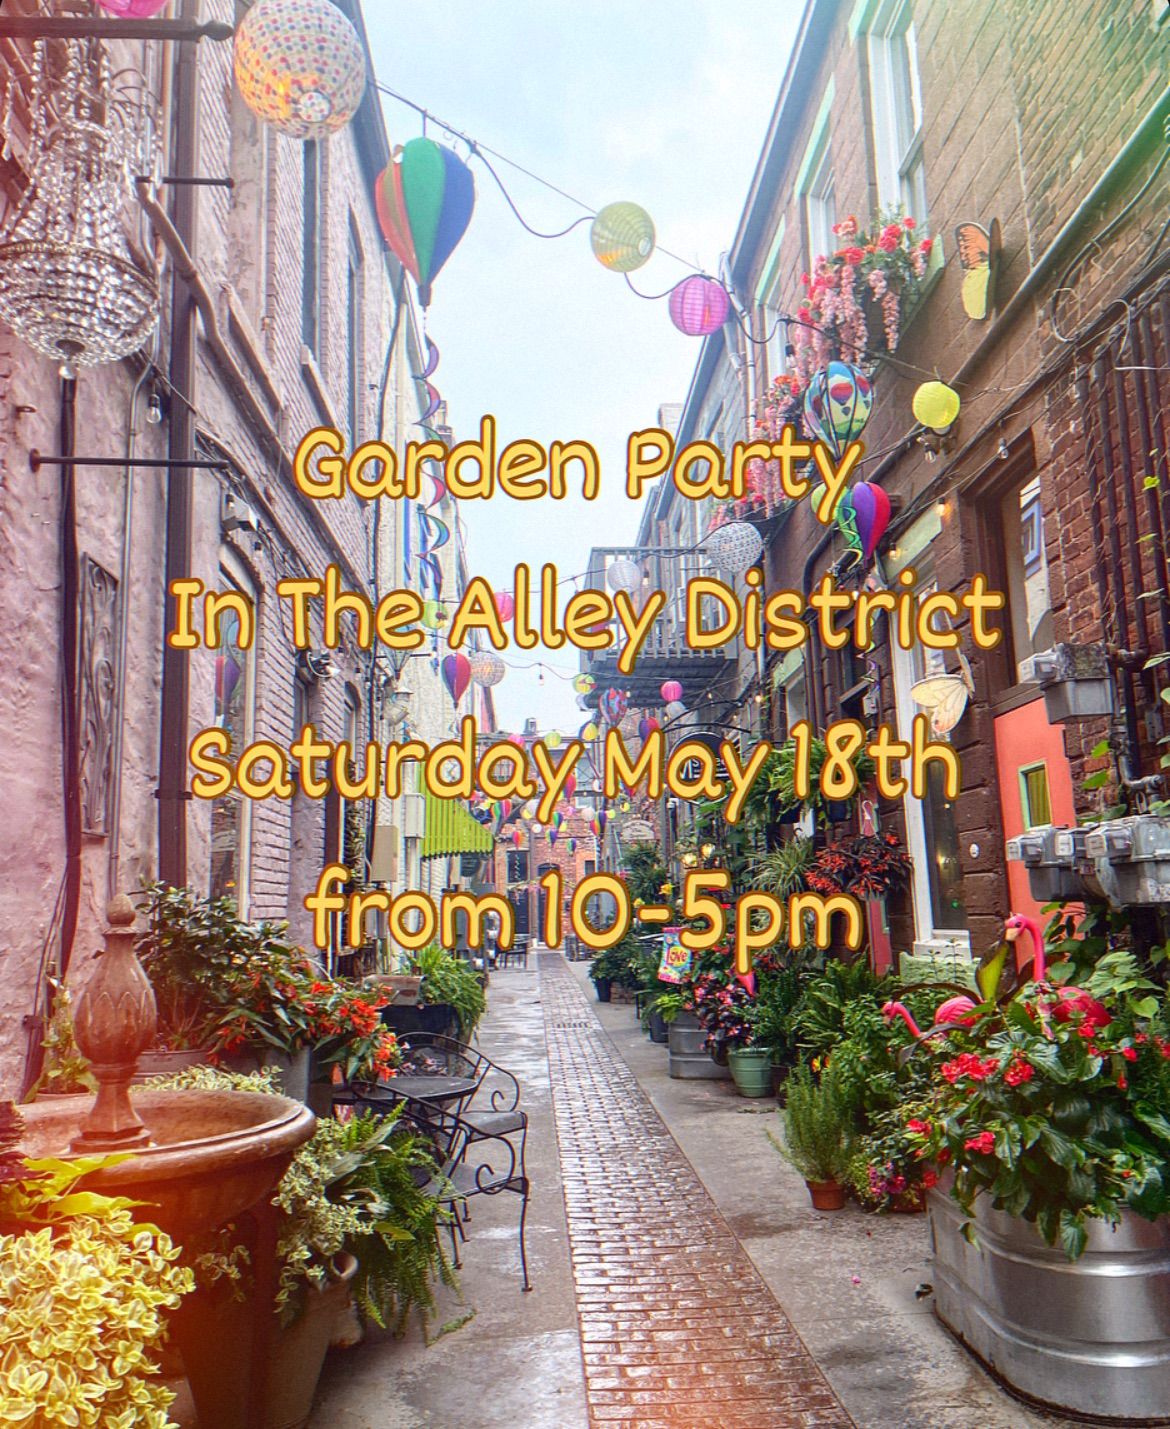 The Alley District presents: A Garden Party In The Alley \ud83c\udf38